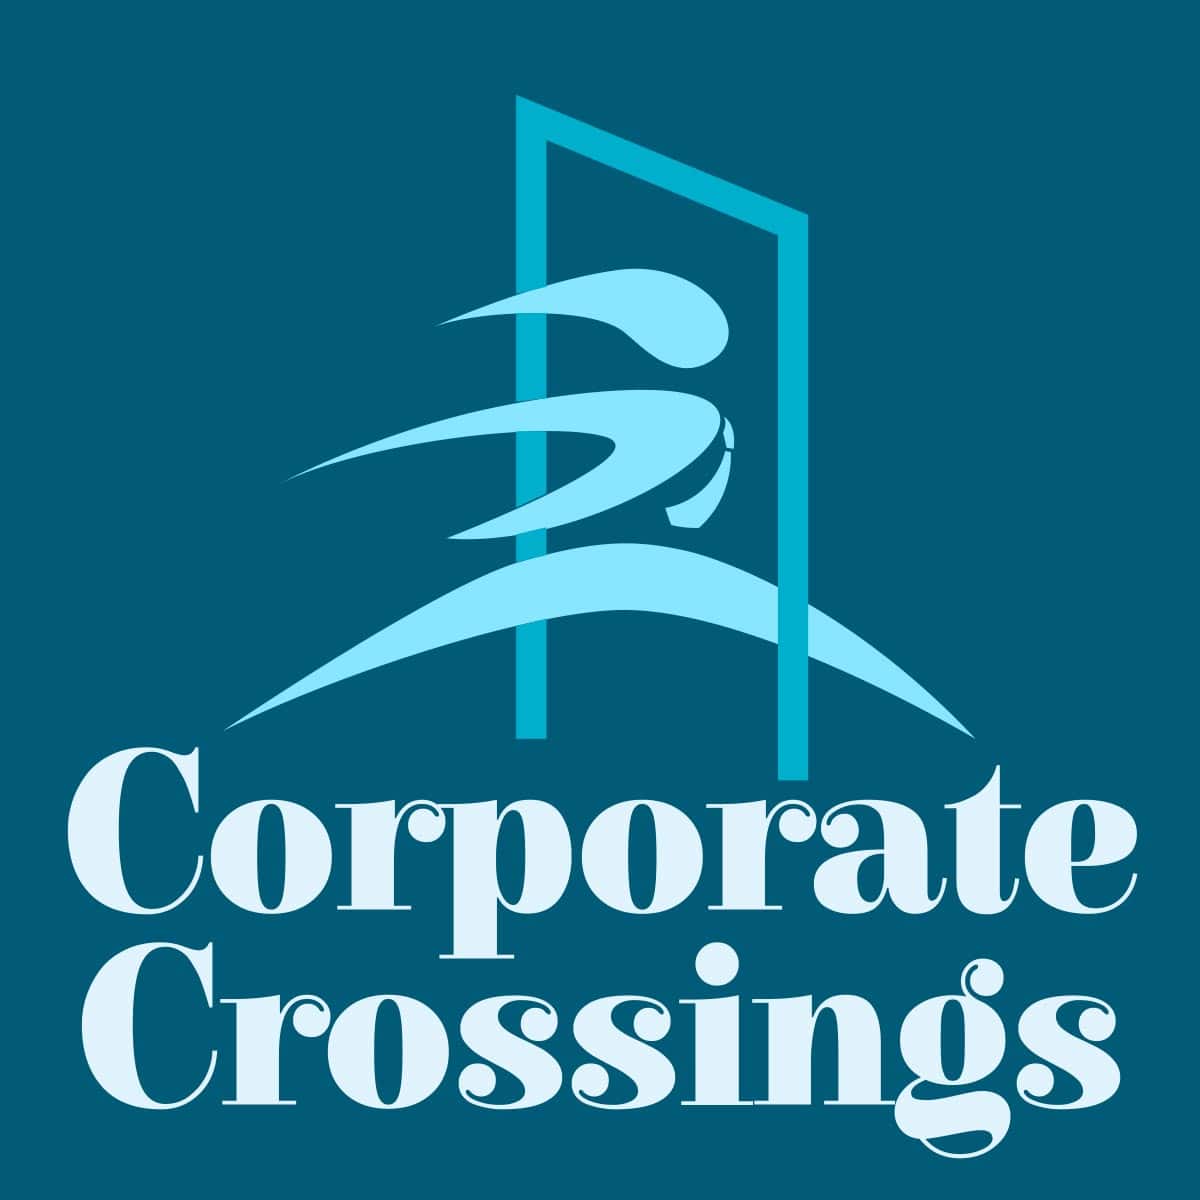 Corporate Crossings: Sequoia India hires Mohit Abraham as legal head from Travis Kalanick’s startup